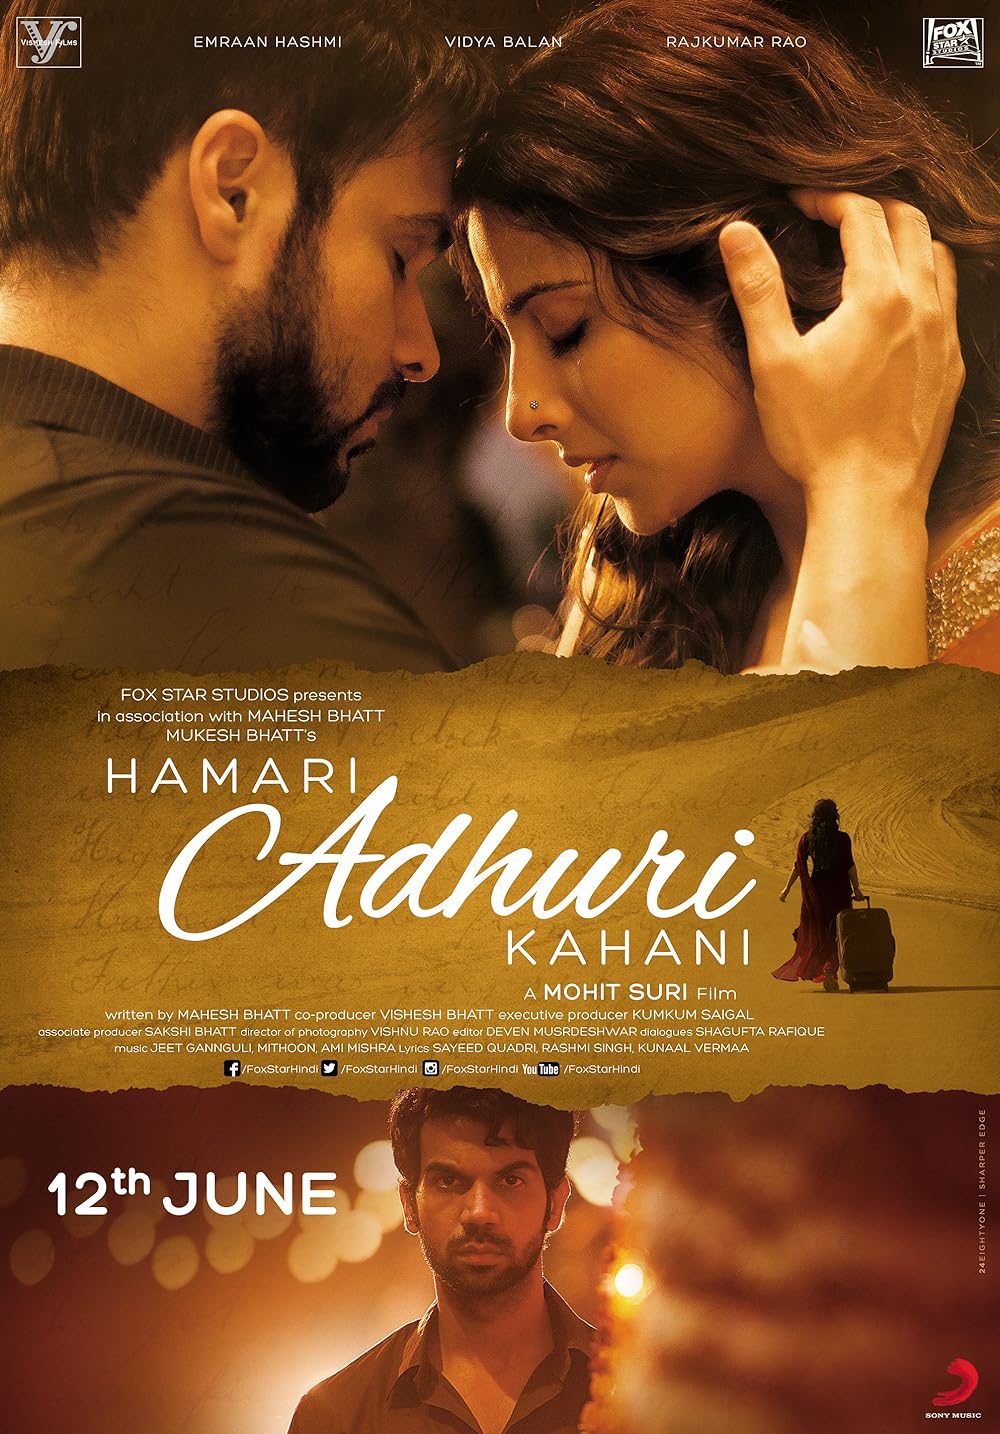 Hamari Adhuri Kahani: Emraan Hashmi showcased his emotional range in this romantic drama directed by Mohit Suri. He played the role of Aarav Ruparel, a wealthy hotel magnate caught in a complicated love triangle.